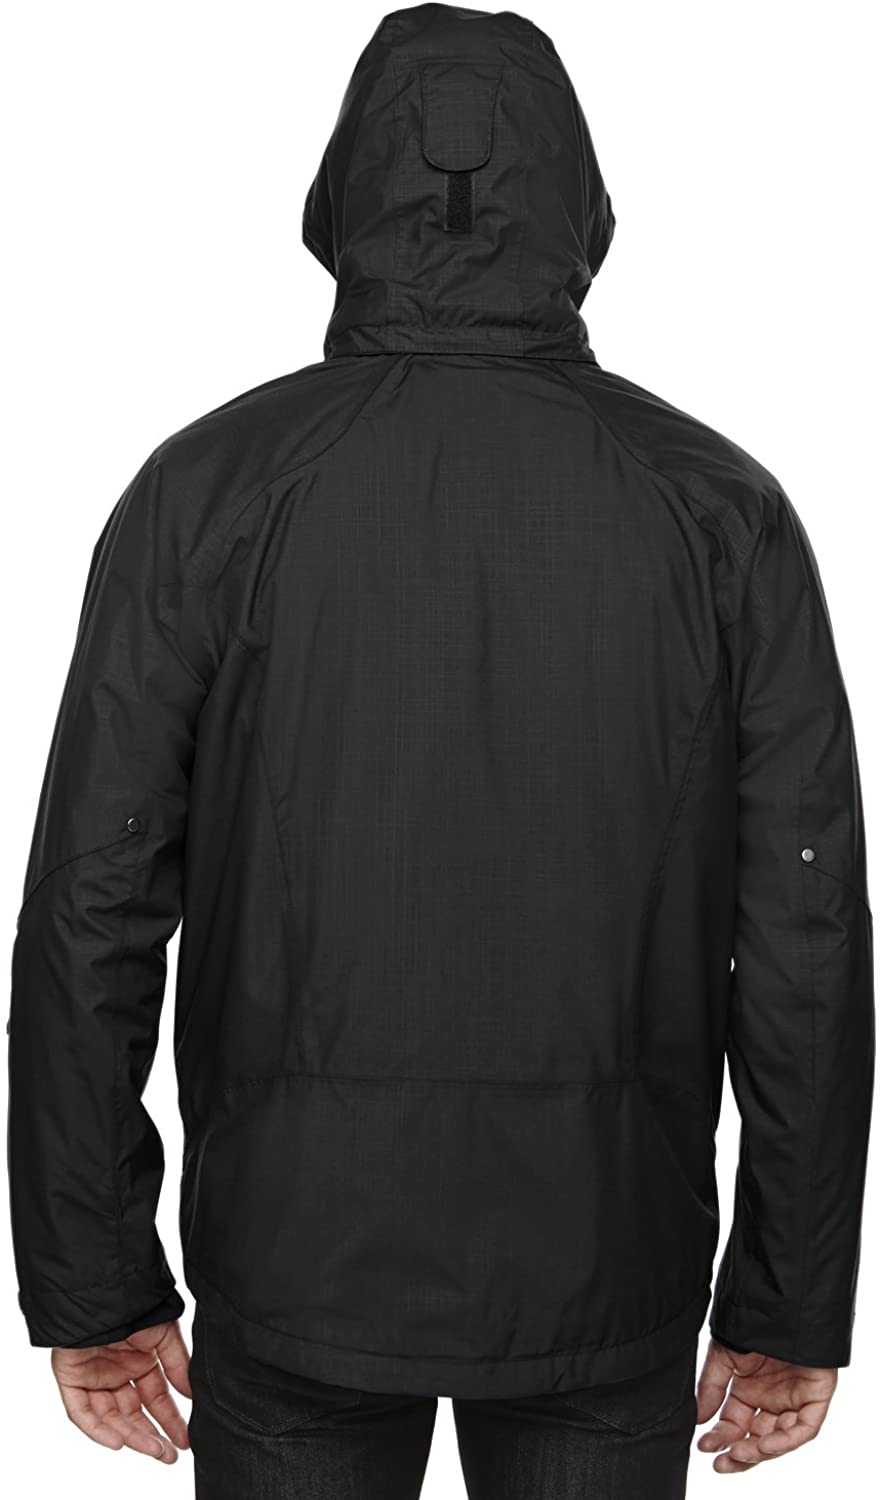 Apparel - Tops - Outerwear - North End Caprice Men's 3-In-1 Jacket With Soft Shell Liner